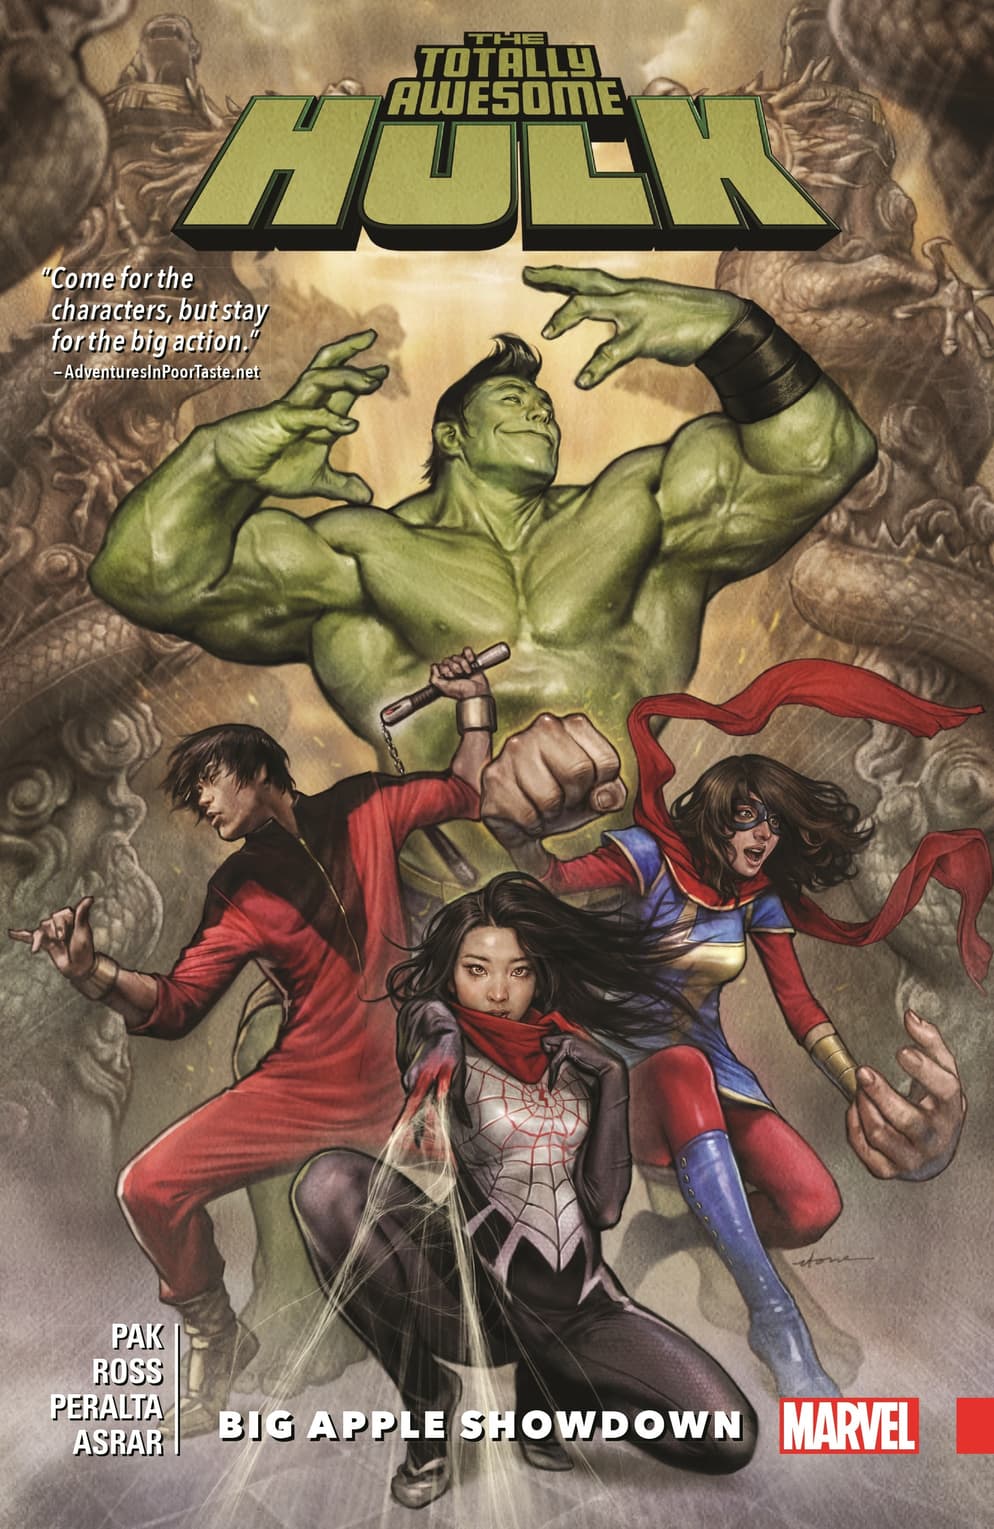 Cover to THE TOTALLY AWESOME HULK VOL. 3: BIG APPLE SHOWDOWN.